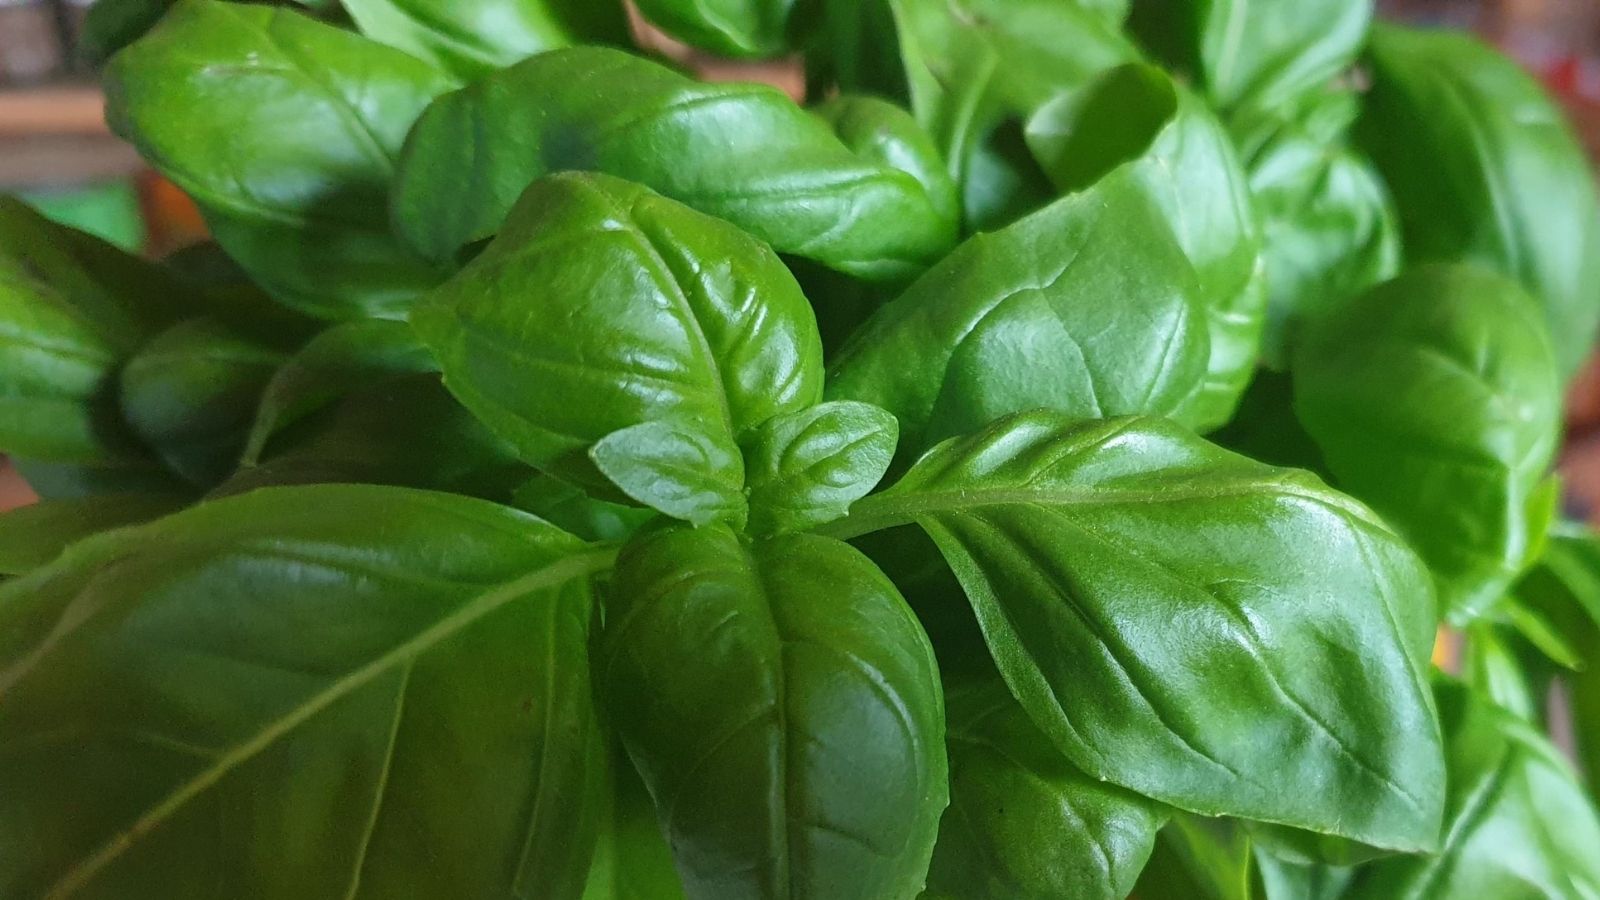 Basil Essential Oil – Cheerful, Uplifting and great for clearing the mind!